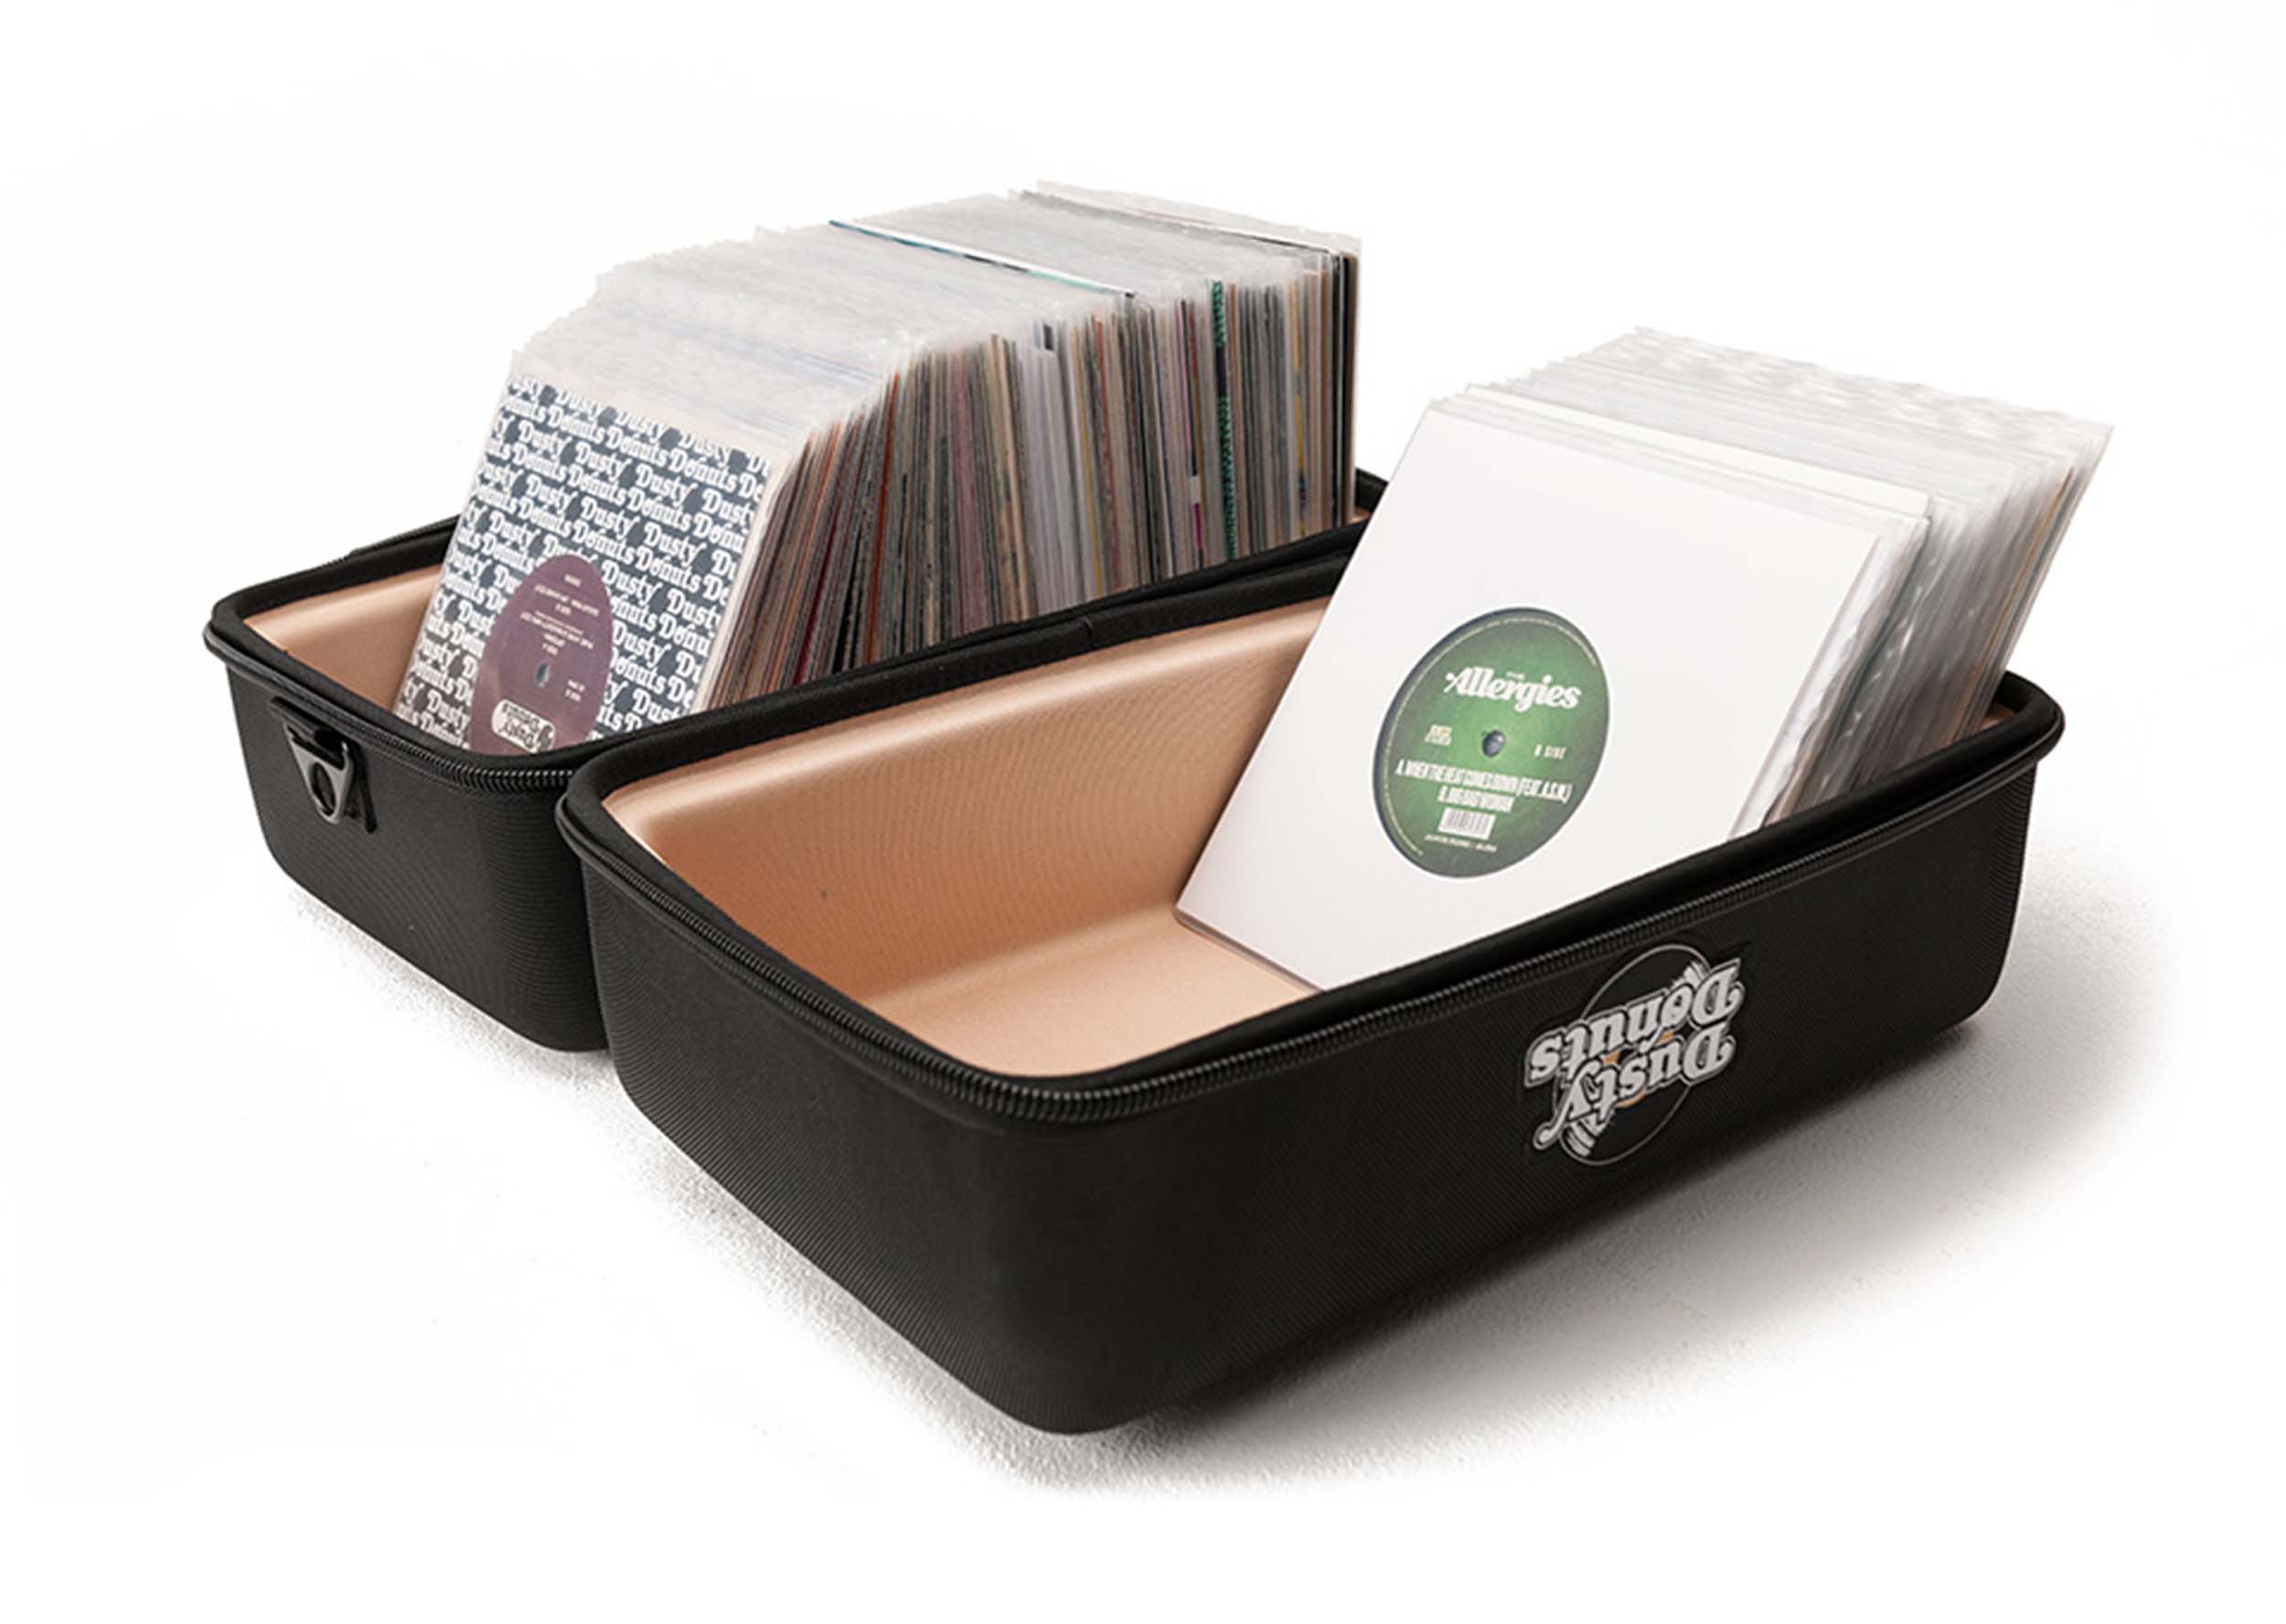 Magma MGA43022, Record Bag for 45 Sandwich Dusty Donuts by Magma